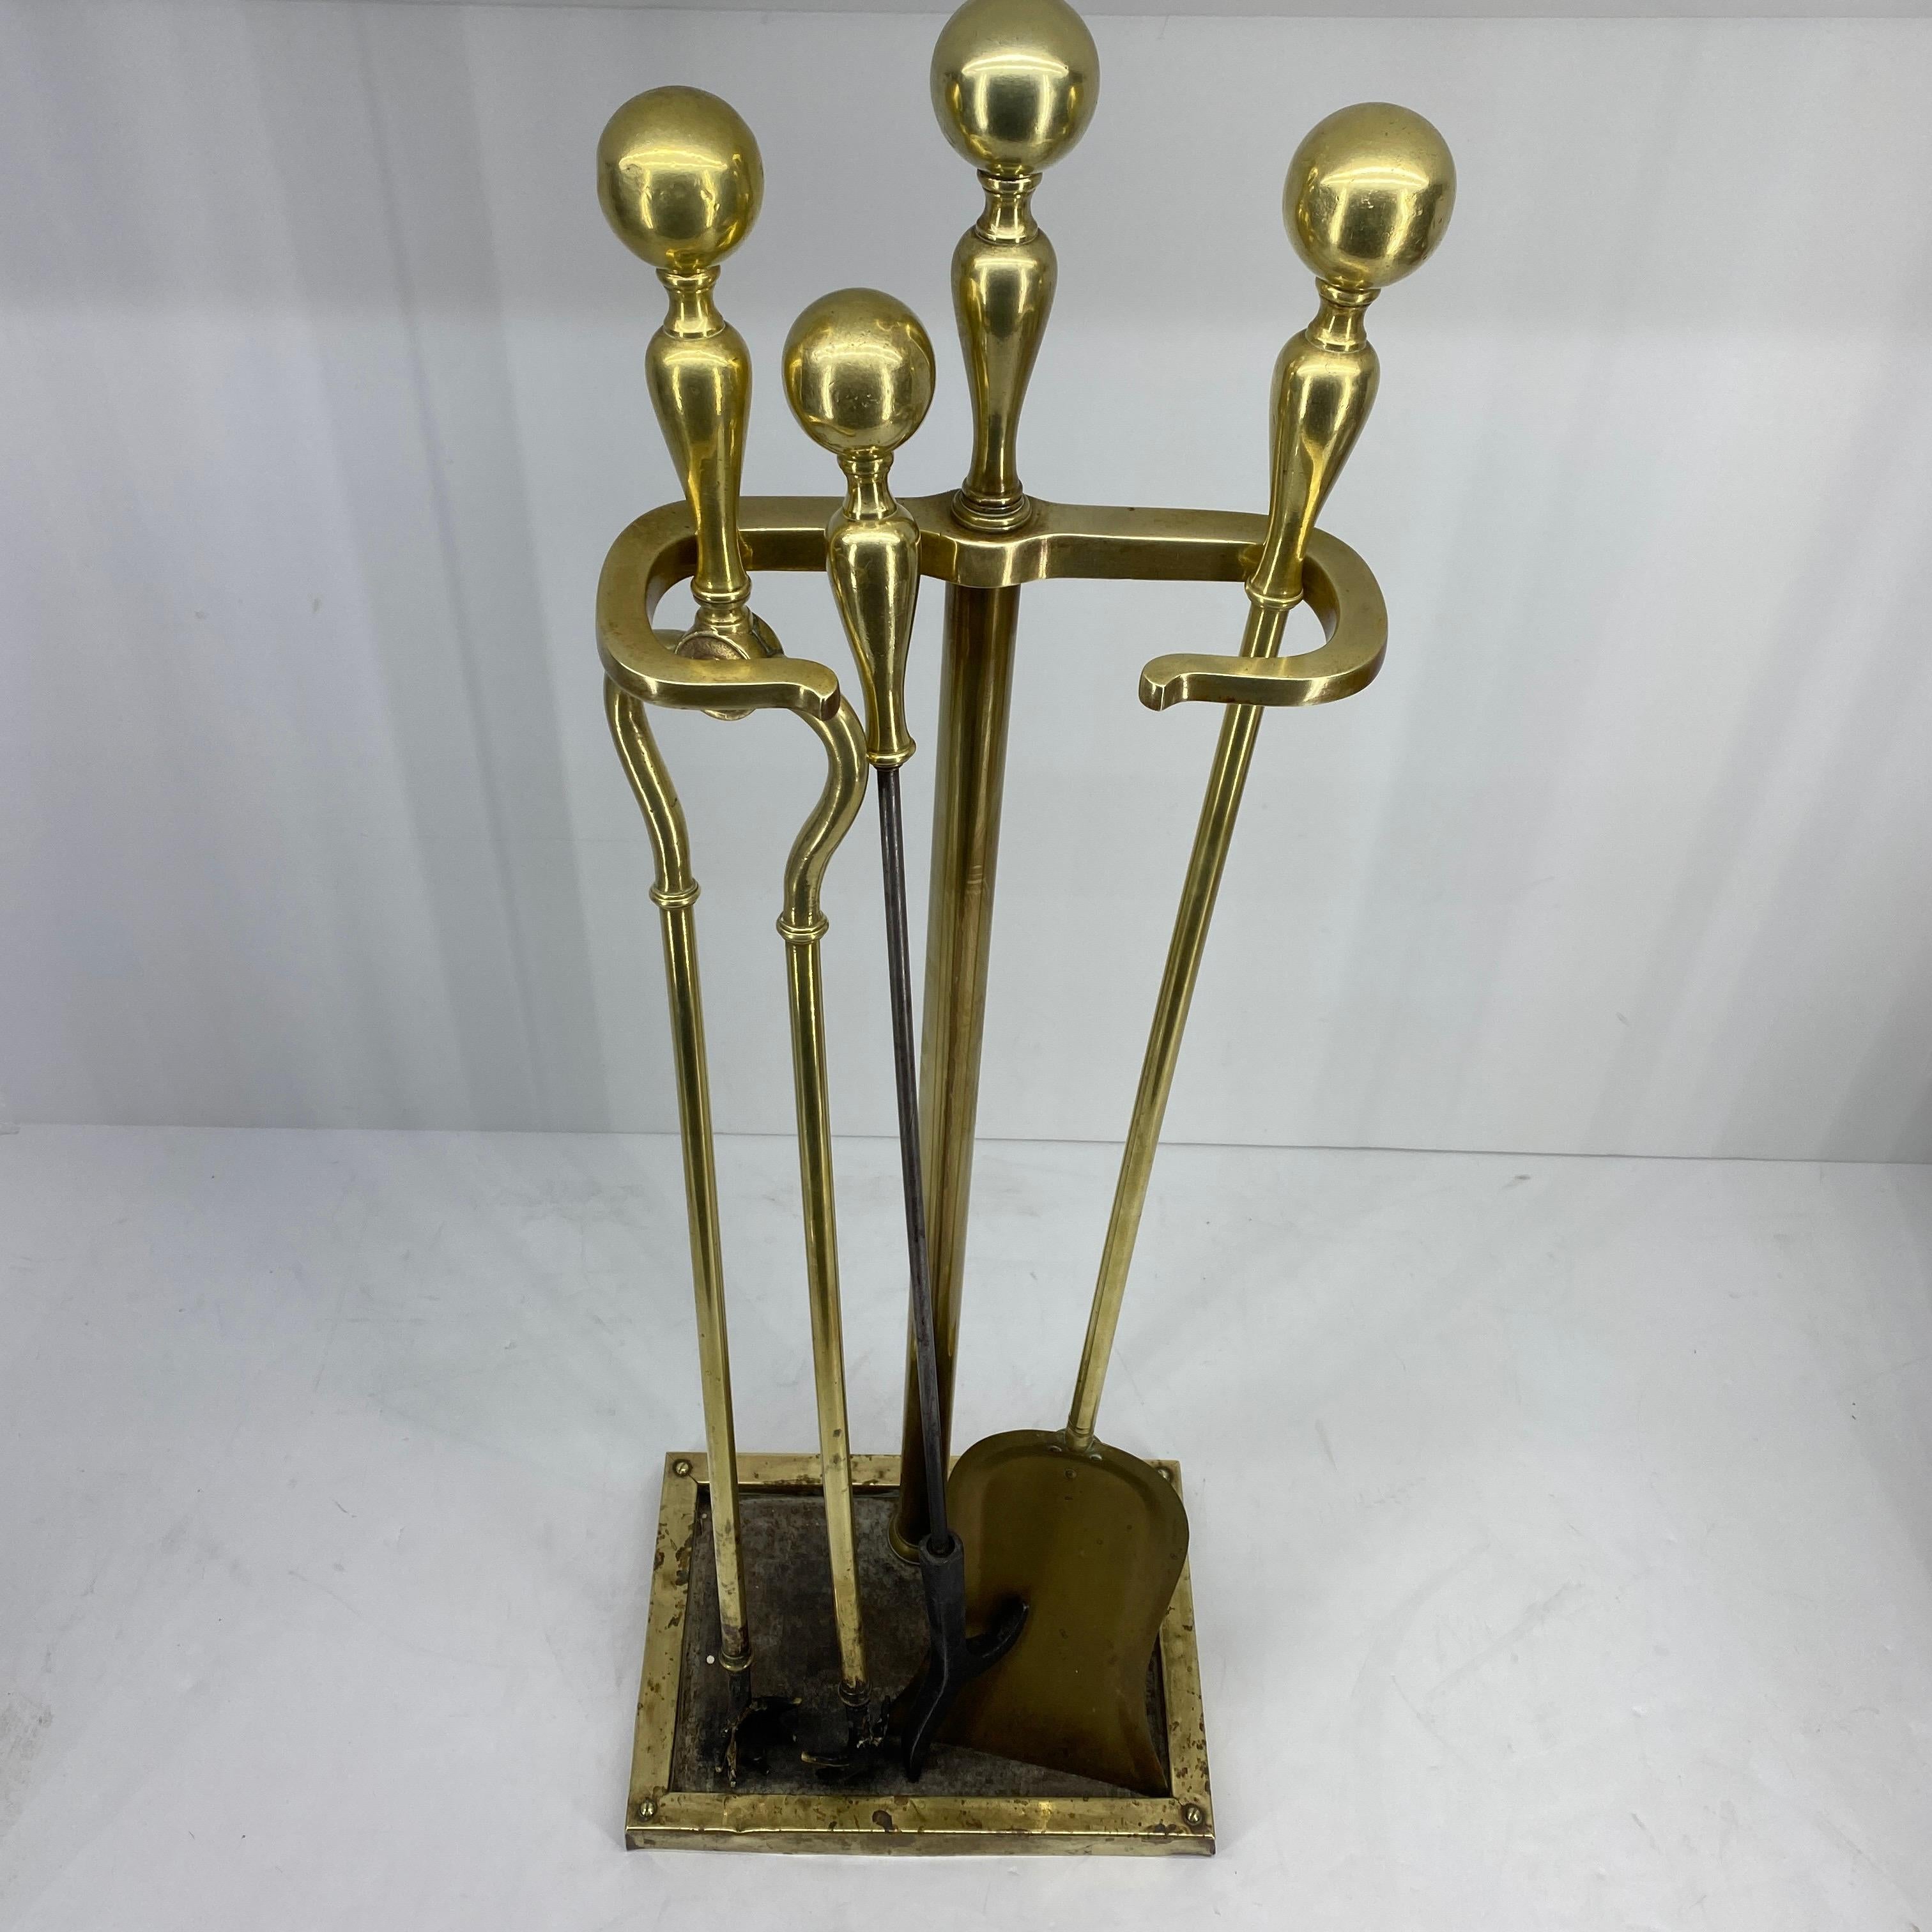 Empire Danish 3-Piece Set of Brass Fireplace Tools and Stand, Late 19th Century